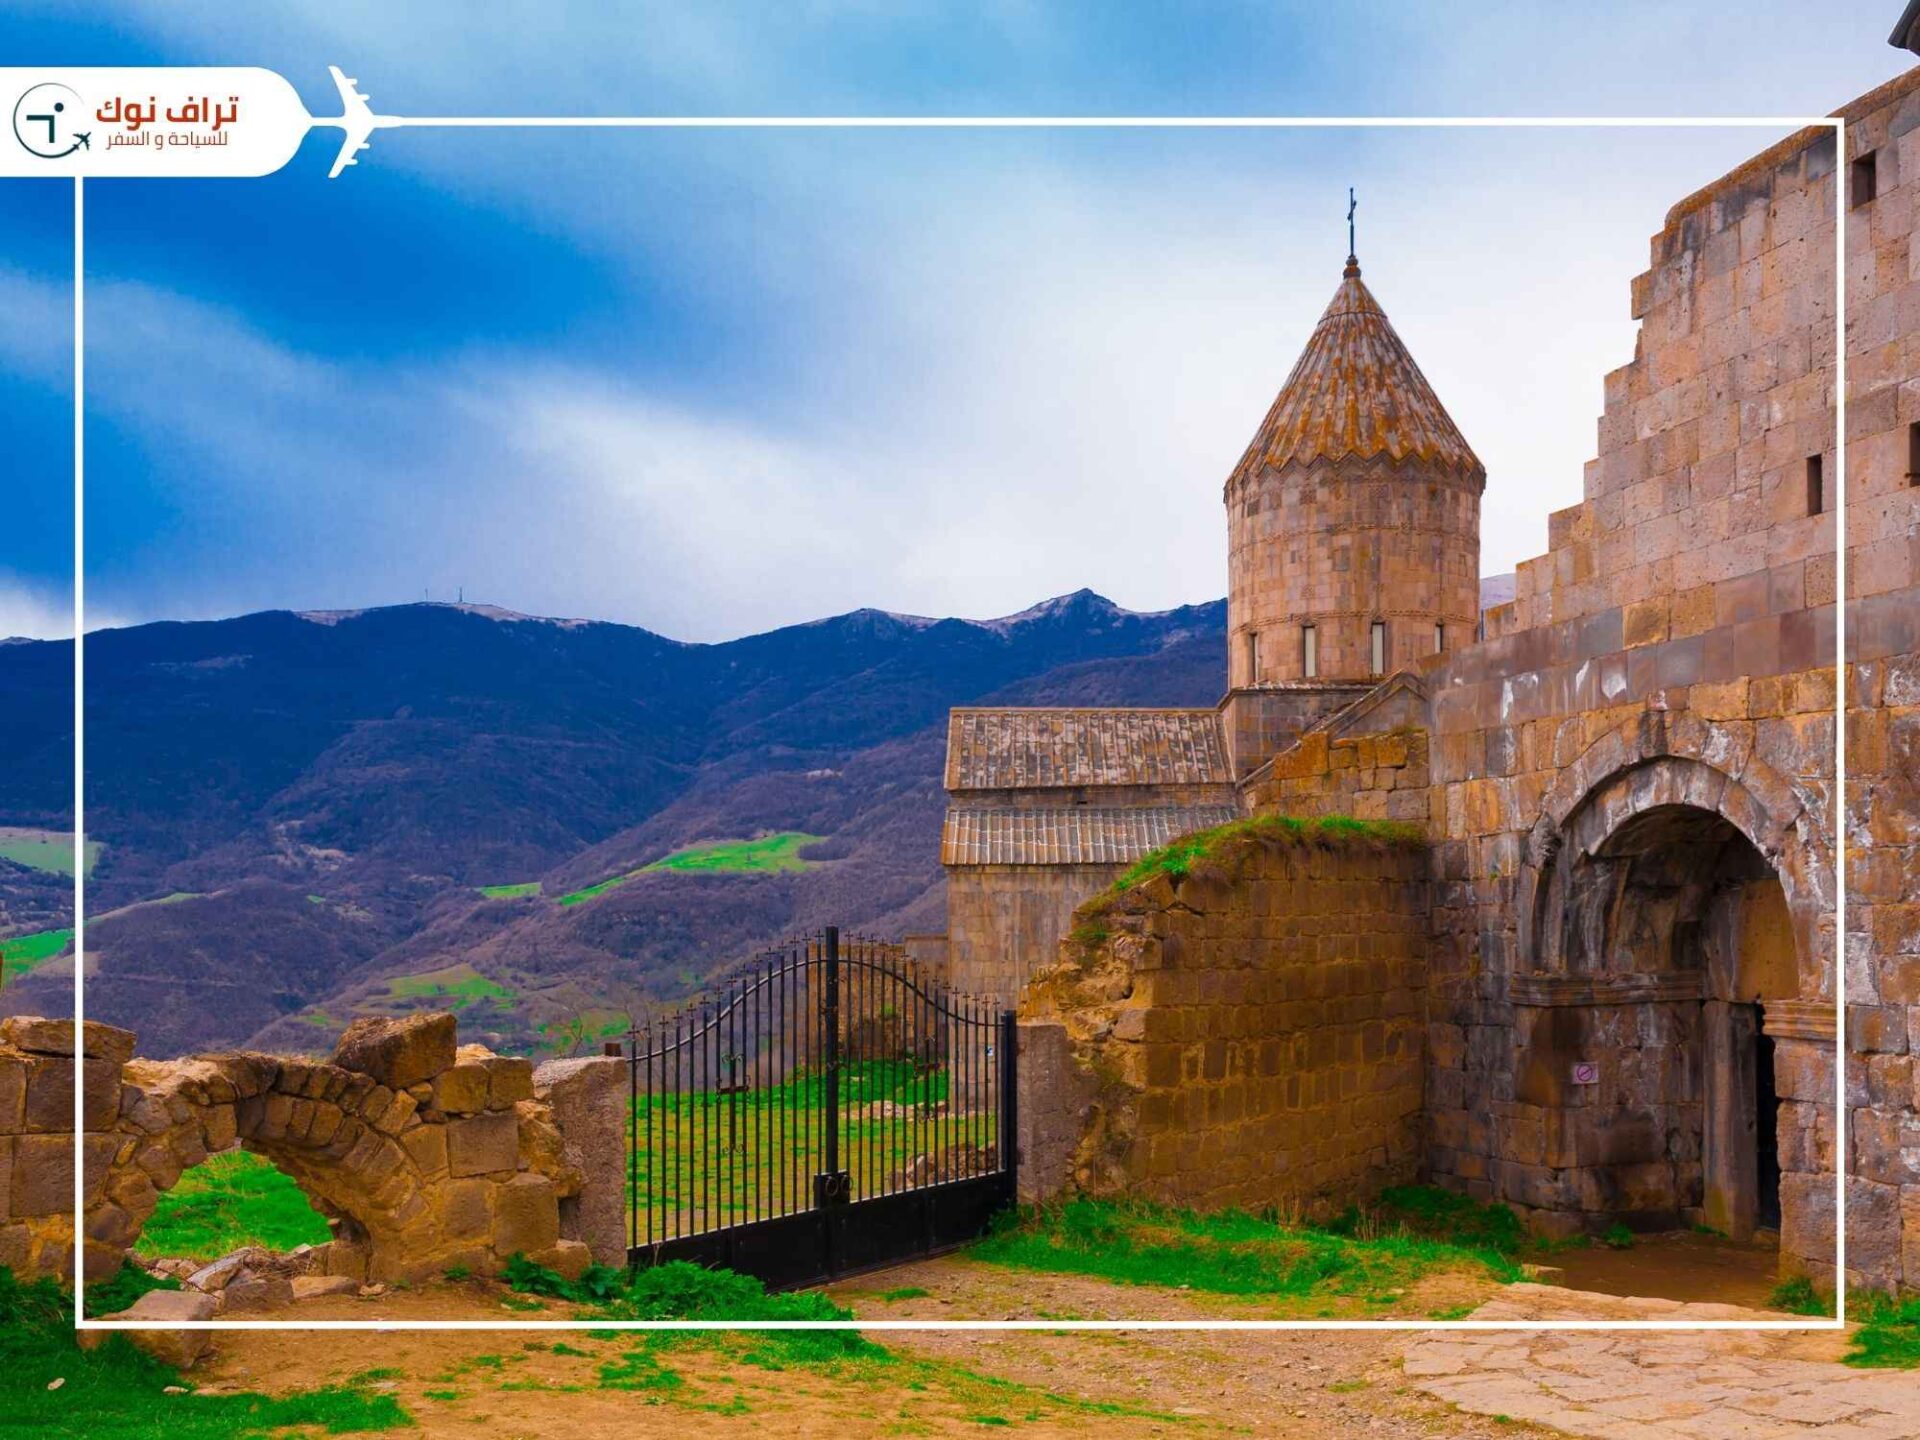 Places to visit during eid holidays from Dubai - Armenia